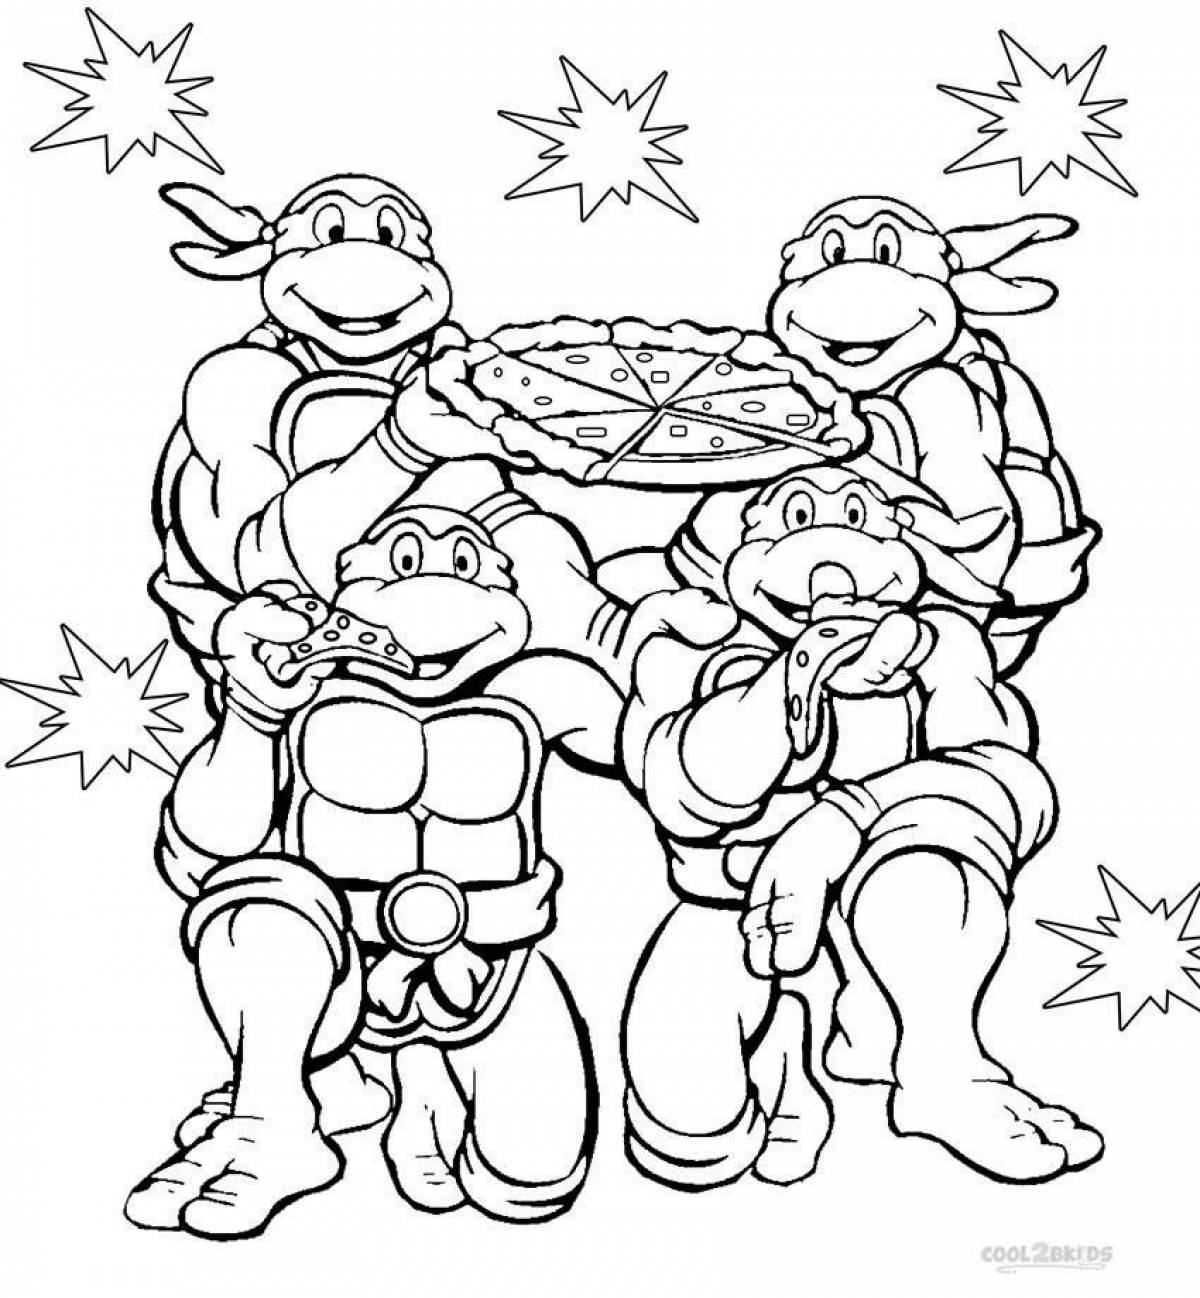 Outstanding ninja turtles coloring page for kids